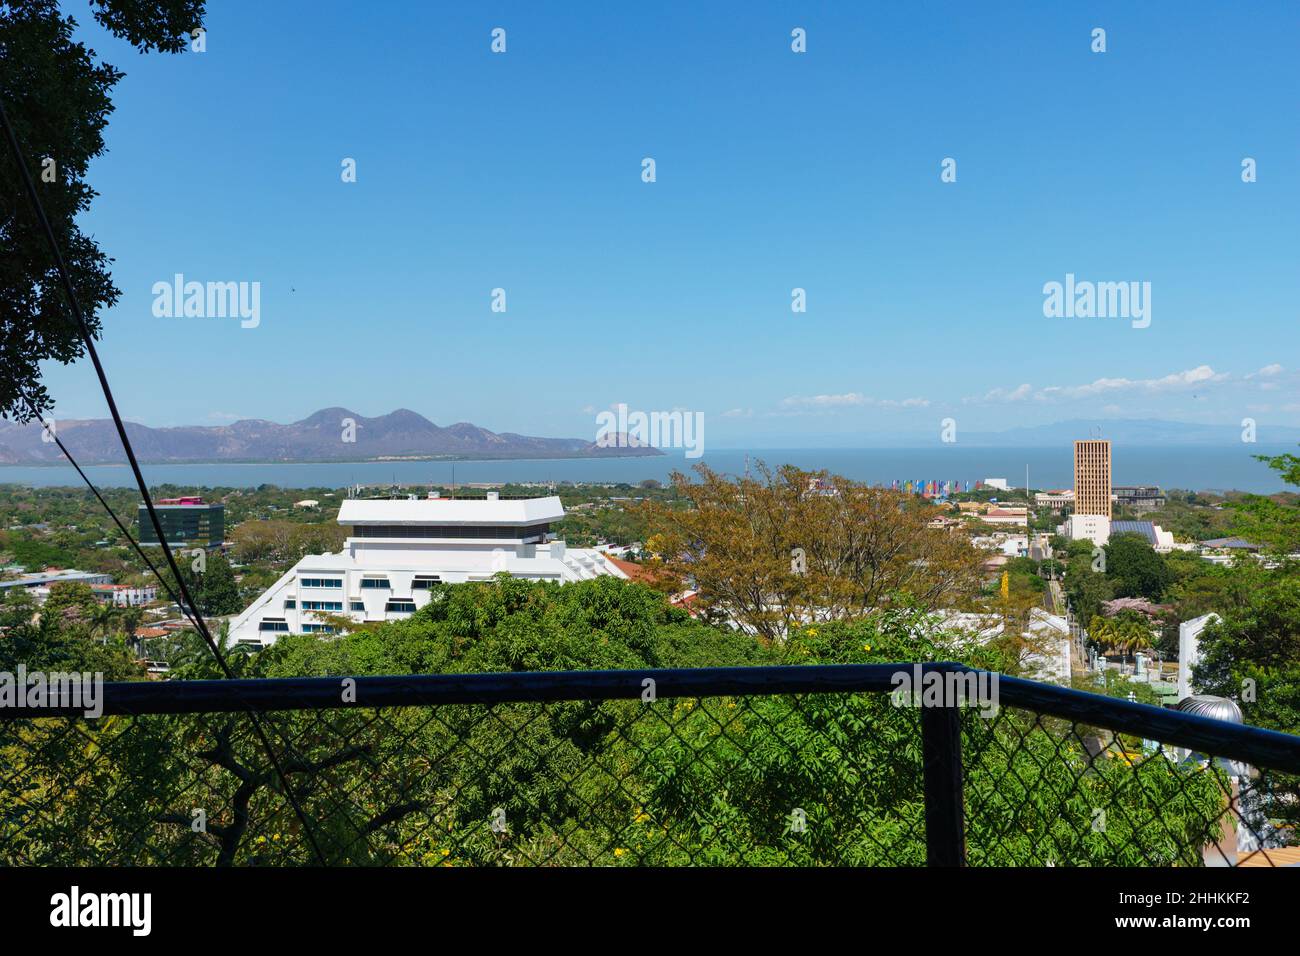 Managua skyline with the Crowne Plaza Hotel in the foreground and Lake Xolotlan and hills in the background. Stock Photo